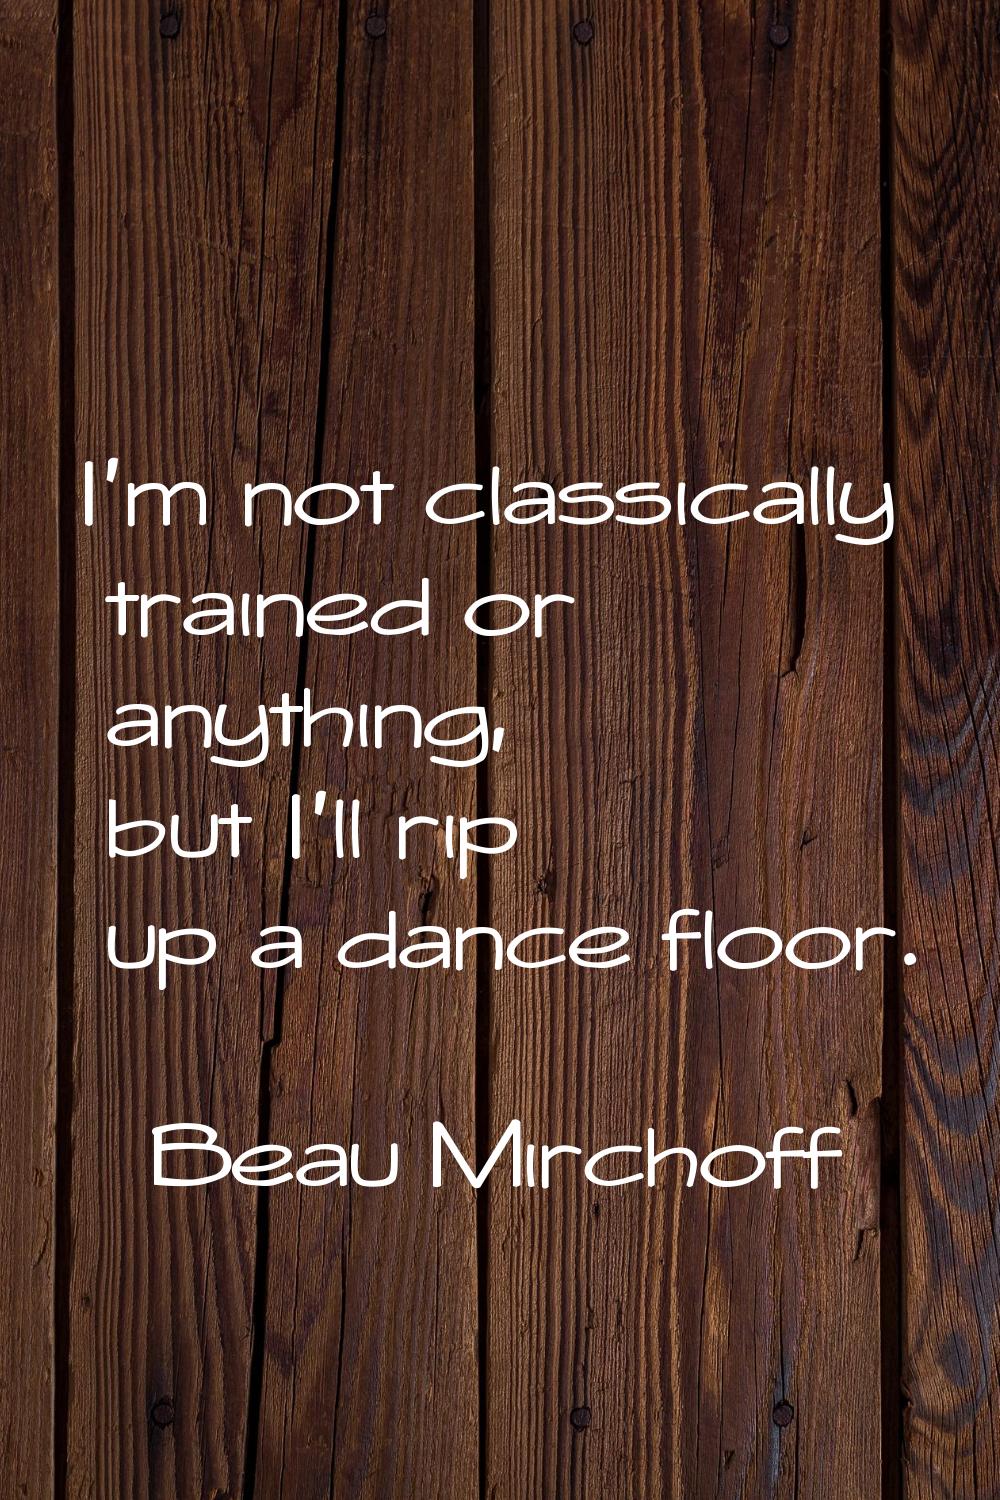 I'm not classically trained or anything, but I'll rip up a dance floor.